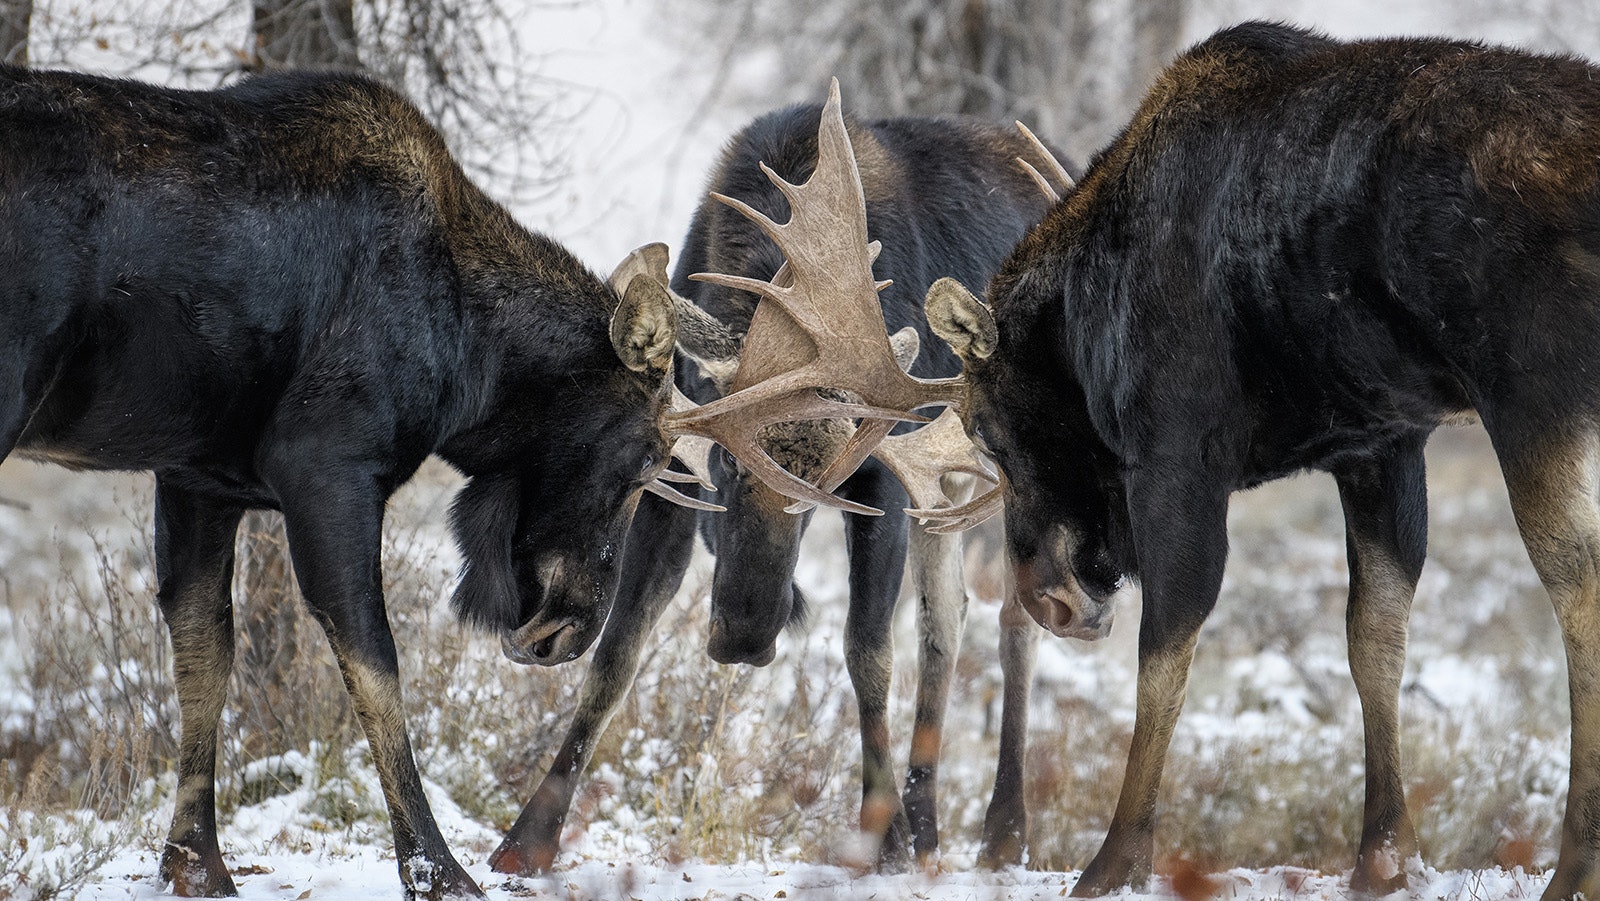 Three-way shoving matches aren’t particularly uncommon among Wyoming bull moose gearing up for the rut (mating season), as evidenced by this recent photo from the Teton region.